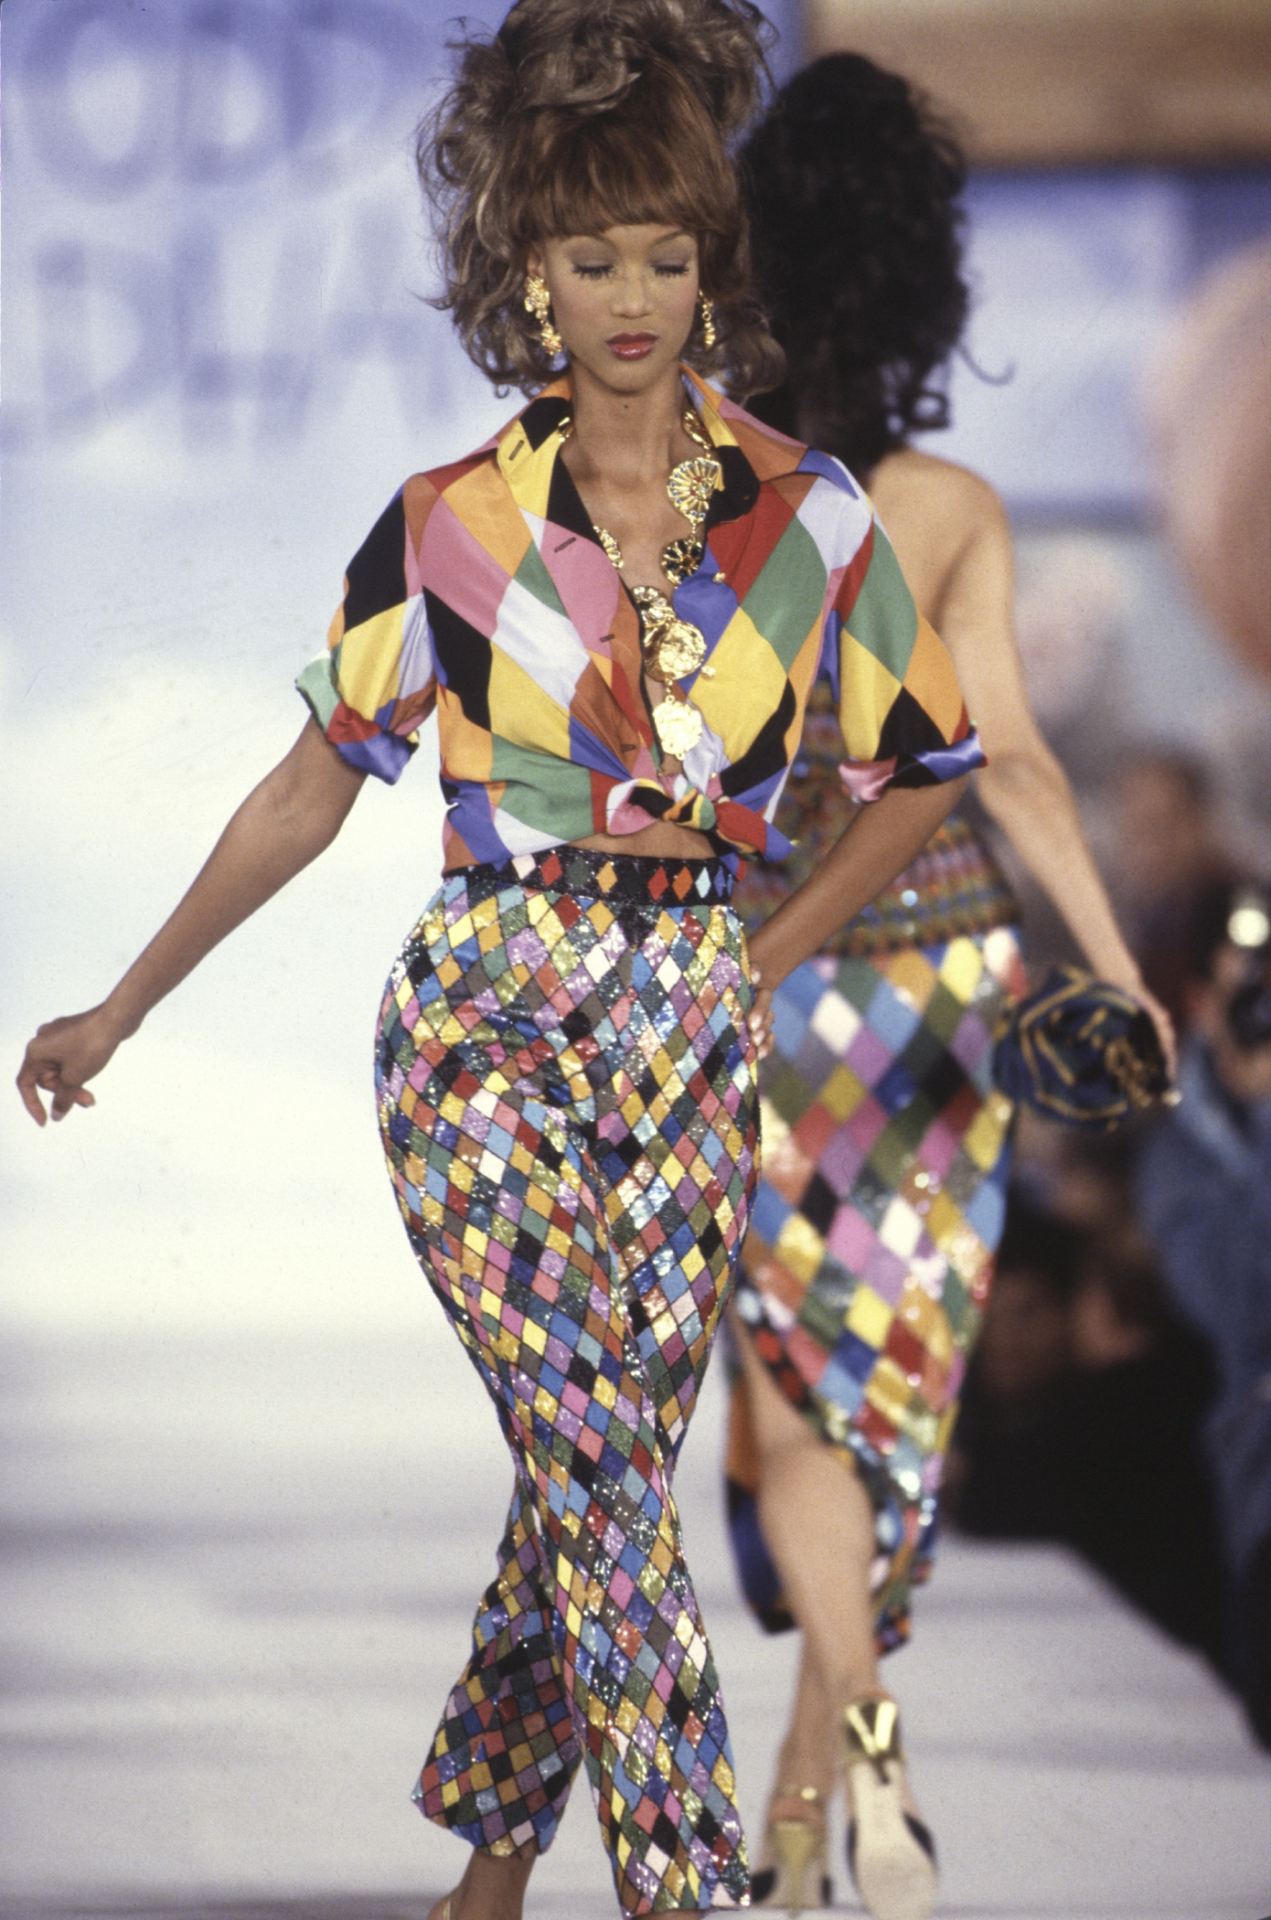 90s fashion designer brings his collections to the Wexner Center in new  exhibit – The Lantern